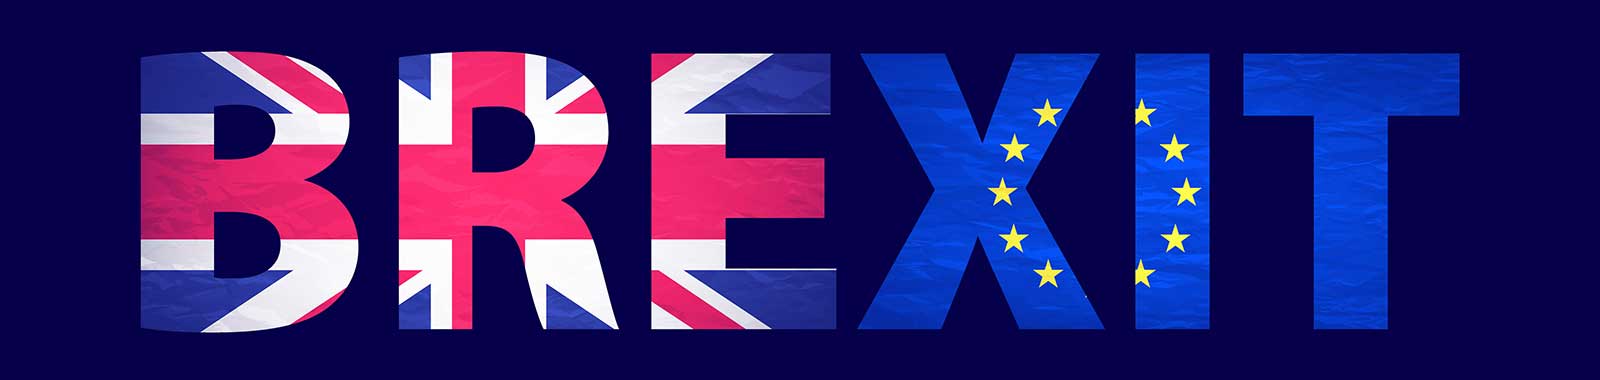 Brexit banner with the Union Jack and European flags